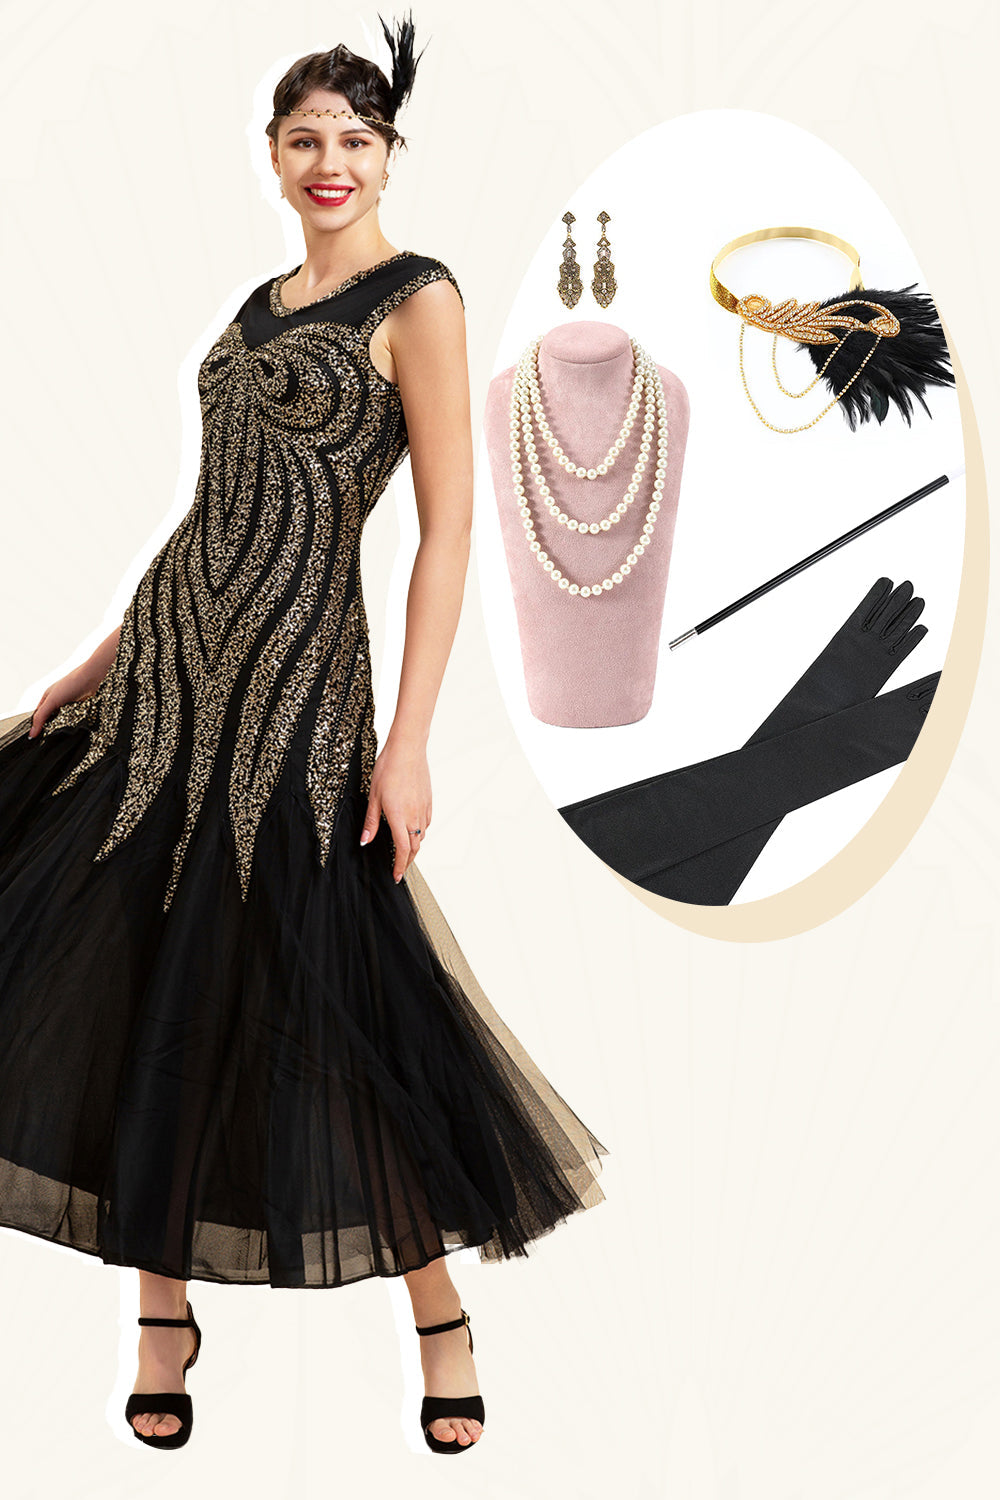 Black Sequins Tulle Flapper Dress with 1920s Accessories Set